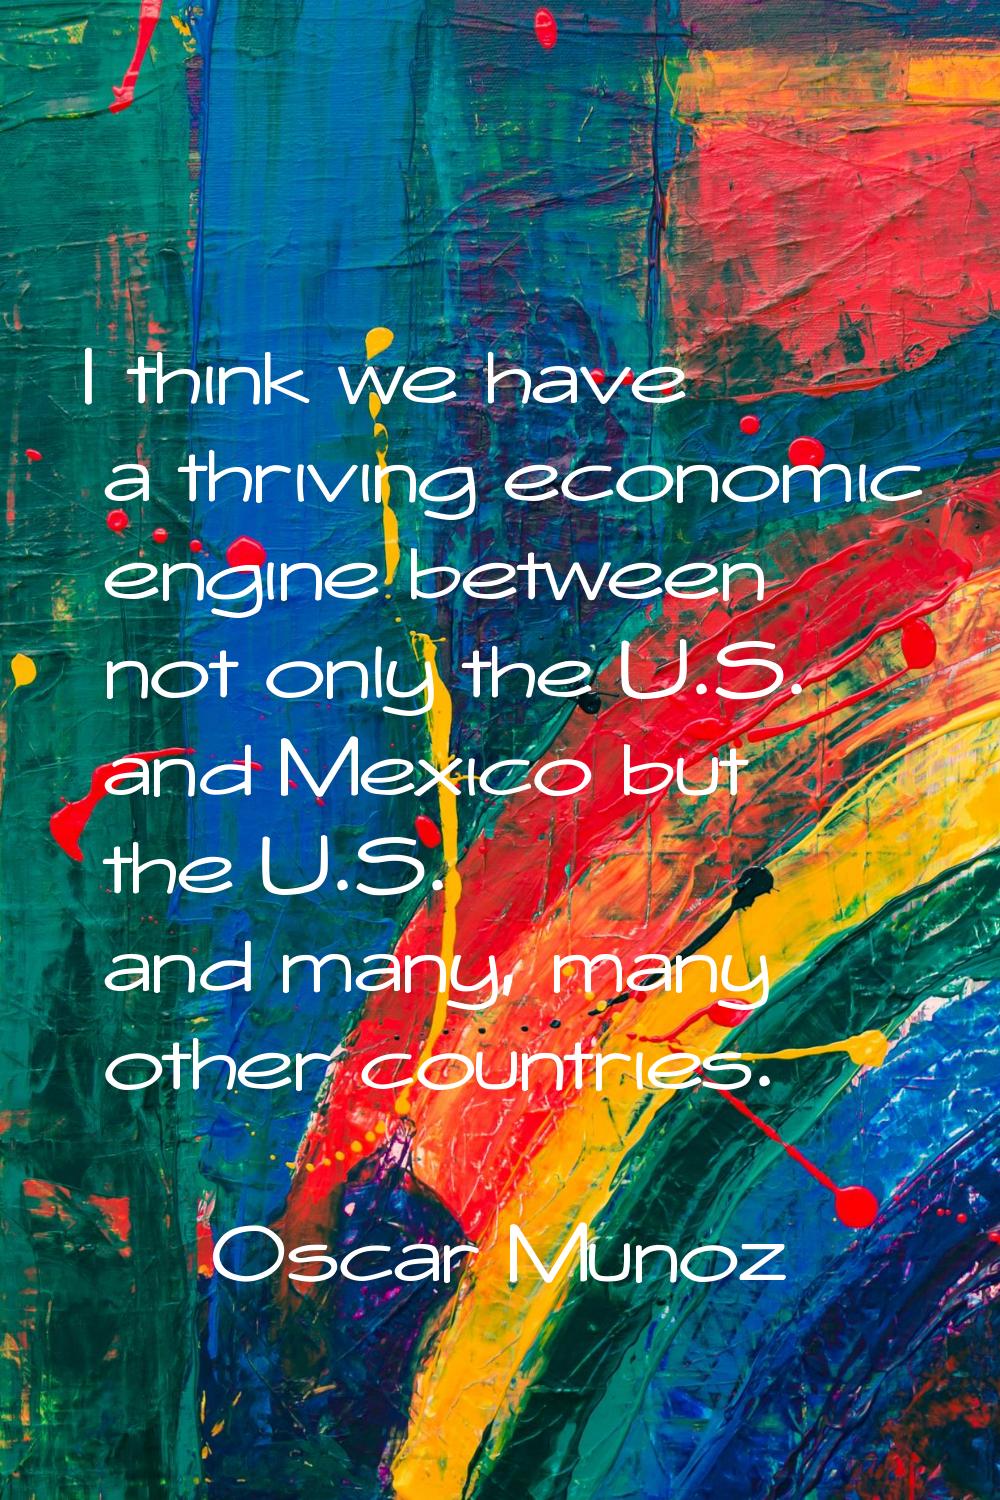 I think we have a thriving economic engine between not only the U.S. and Mexico but the U.S. and ma